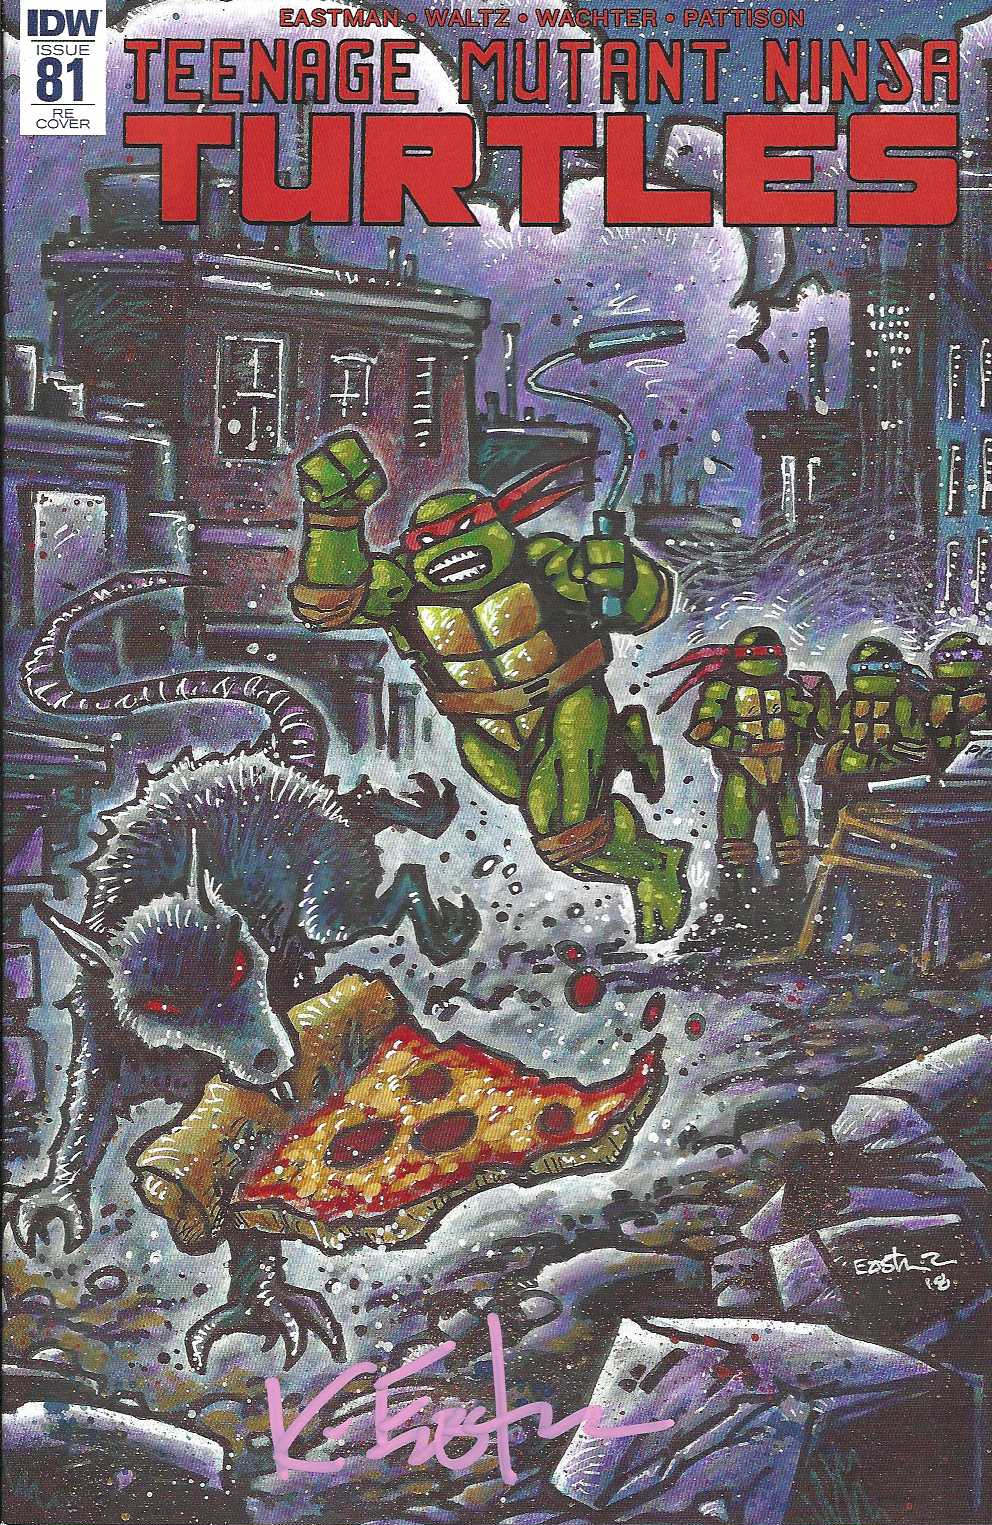 TMNT 81 RE – The Nerd Store Variant Color – Signed